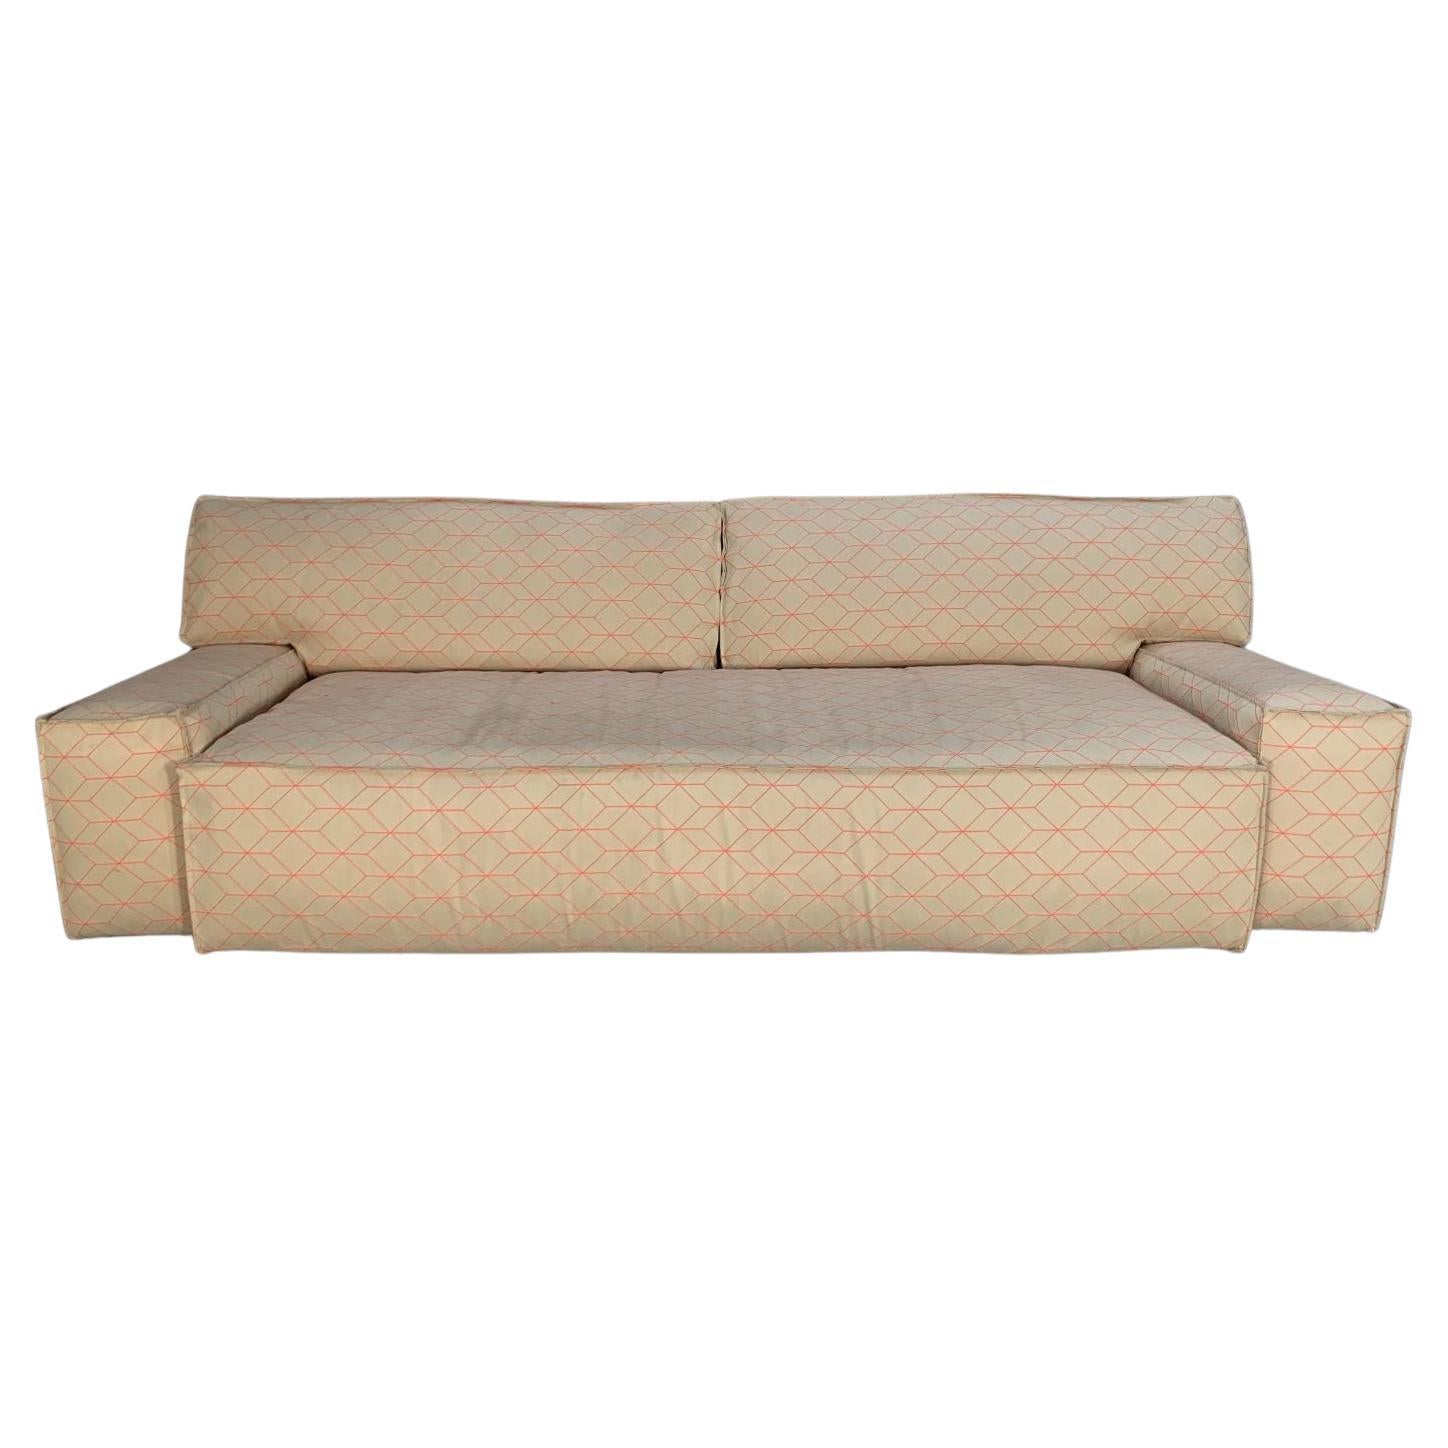 Cassina “MyWorld” 4-Seat Sectional Sofa in Geometric-Print Canvas For Sale